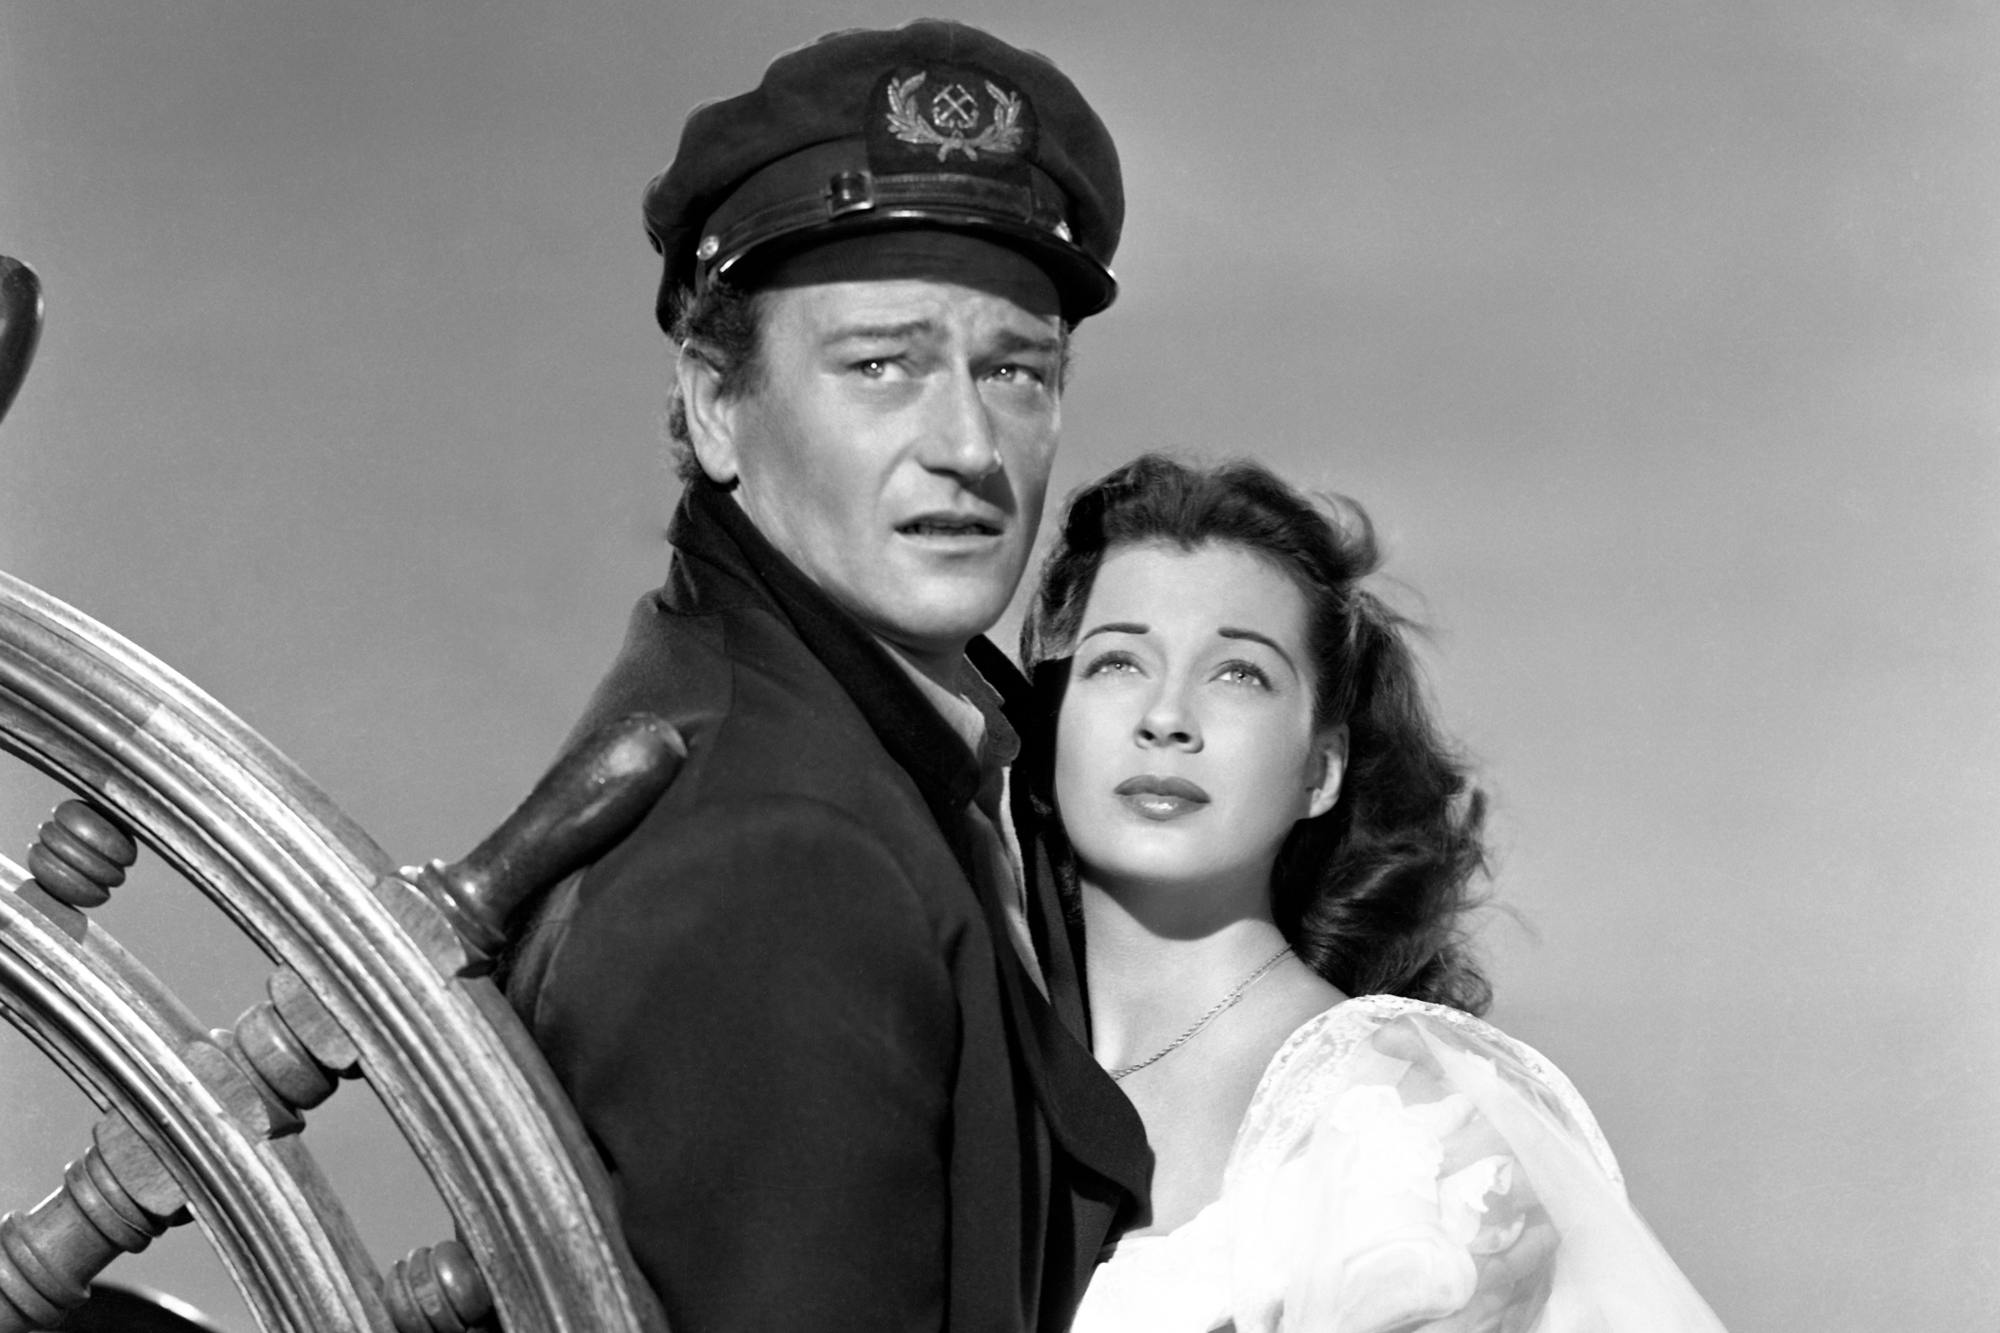 'Wake of the Red Witch' John Wayne as Captain Ralls and Gail Russell as Angelique Desaix looking surprised behind a ship's wheel